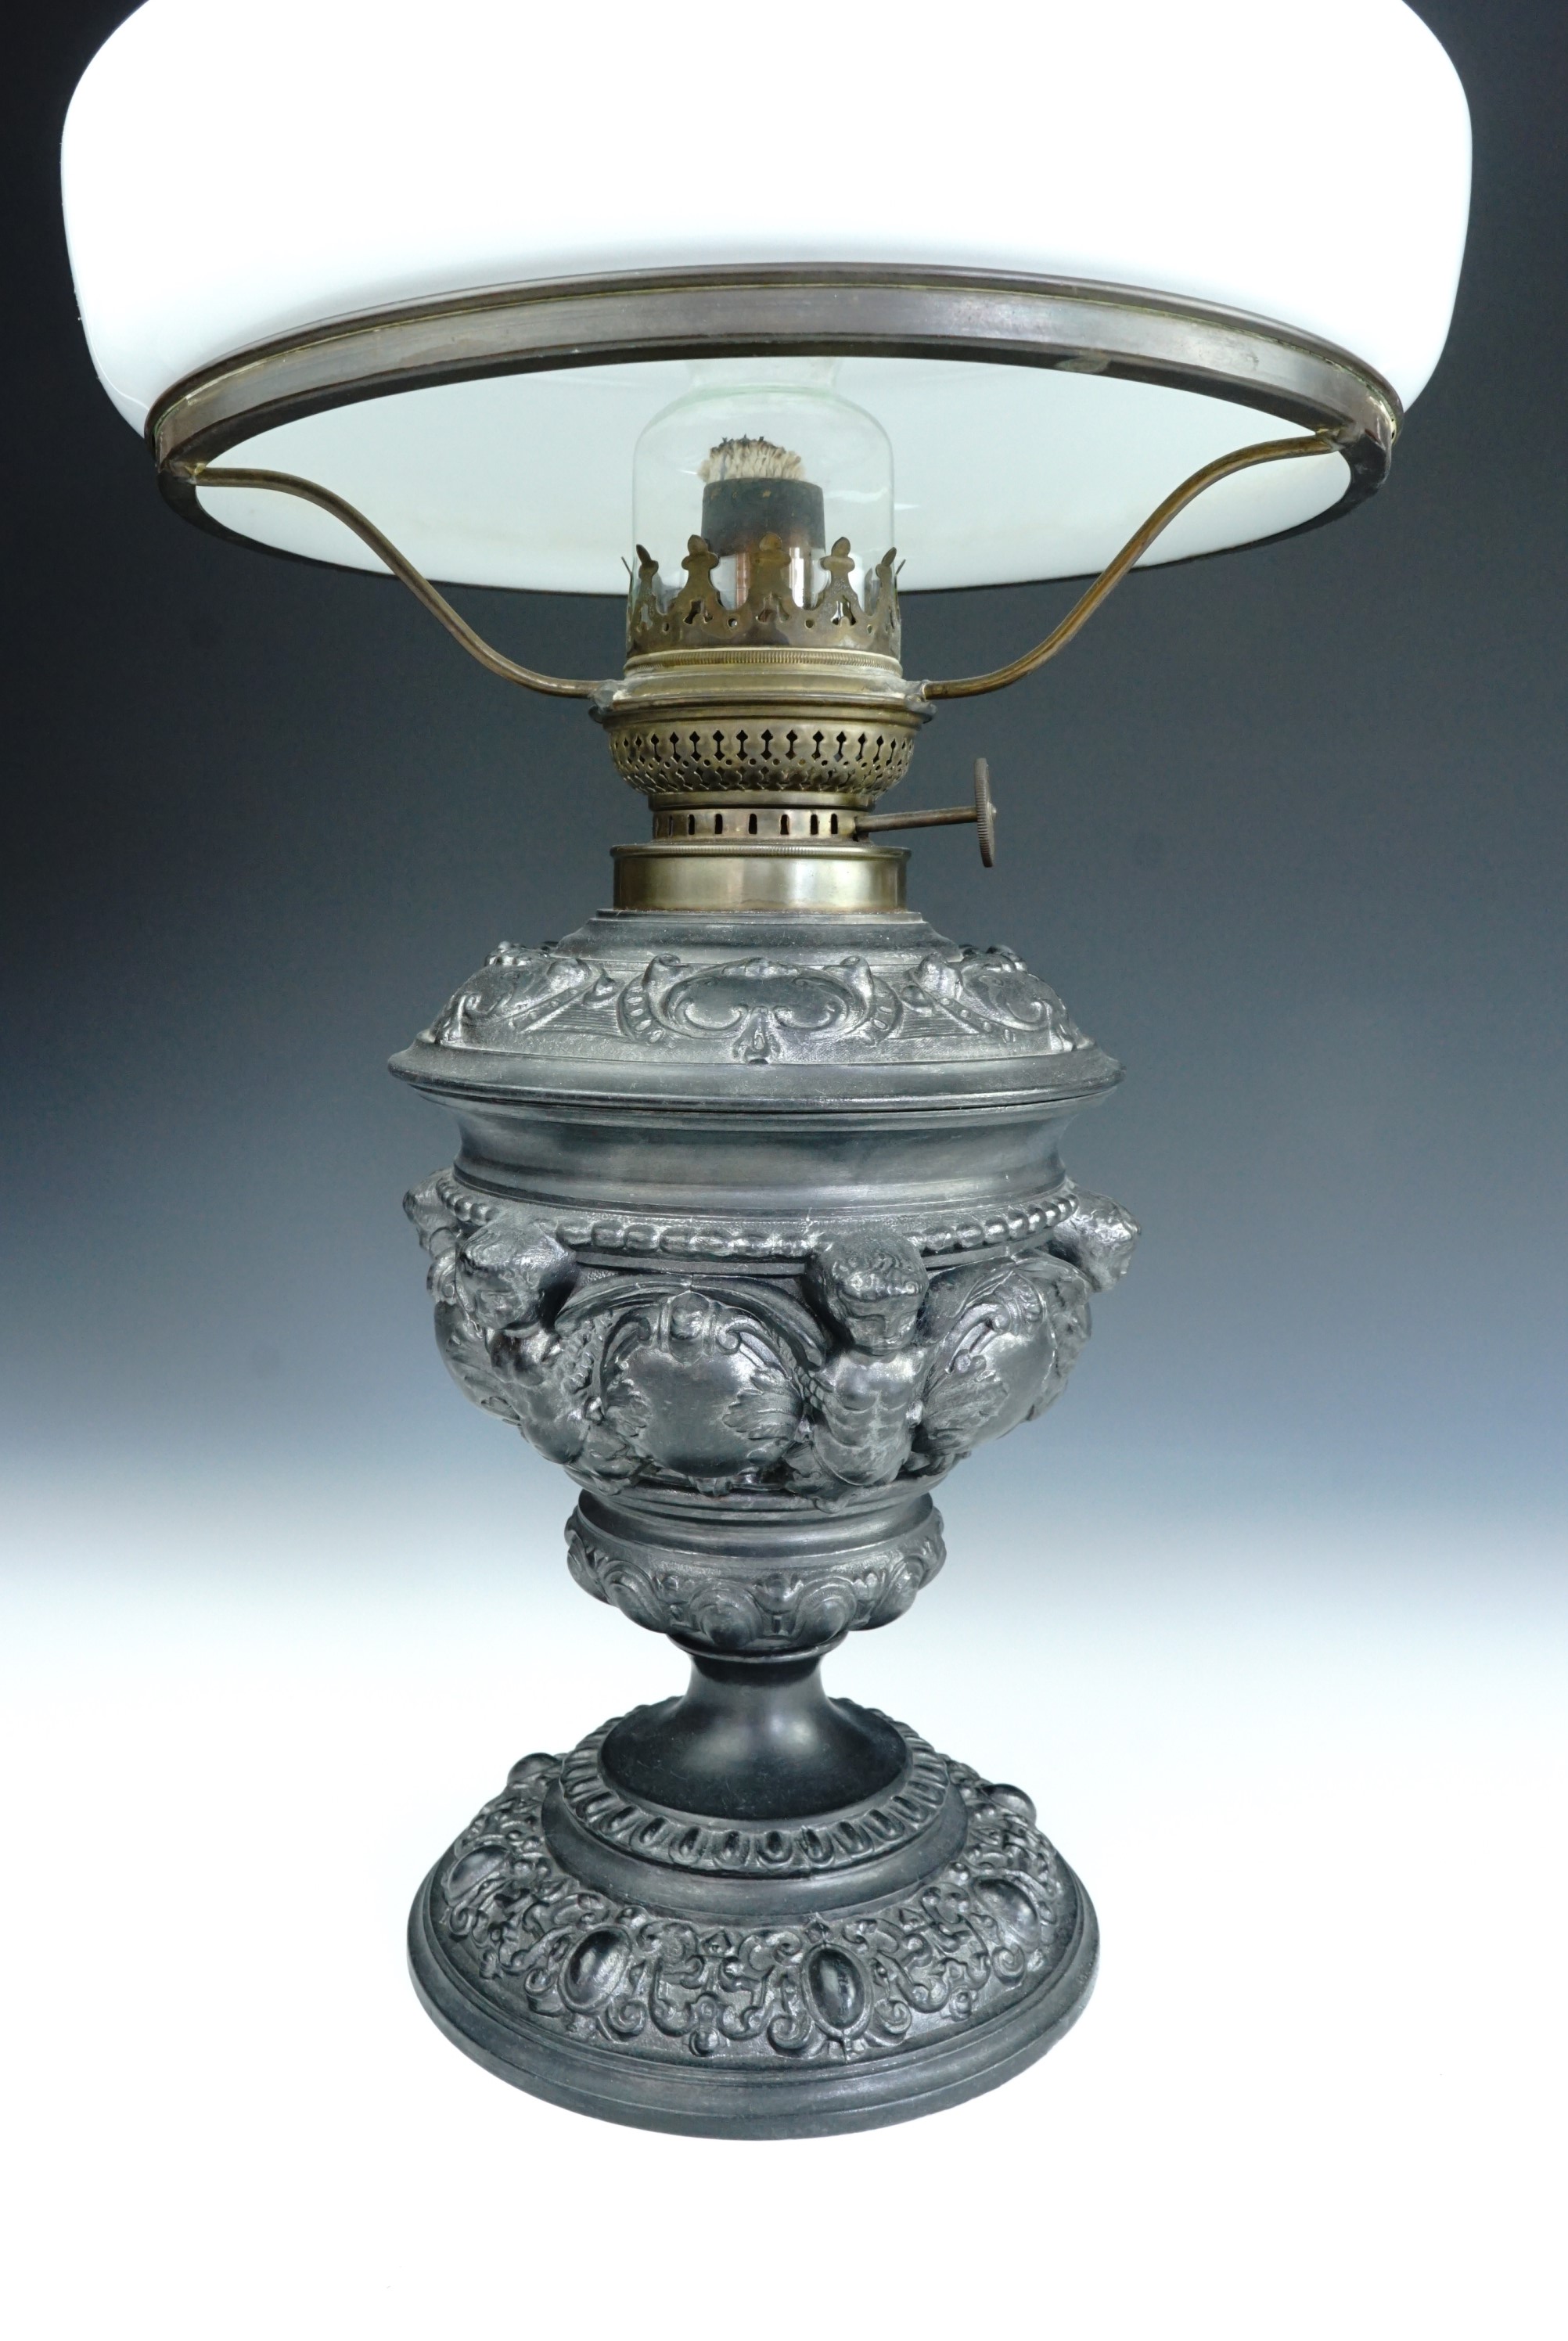 An antique German Kosmos Brenner Baroque style base metal oil lamp, the base incorporating winged - Image 3 of 4